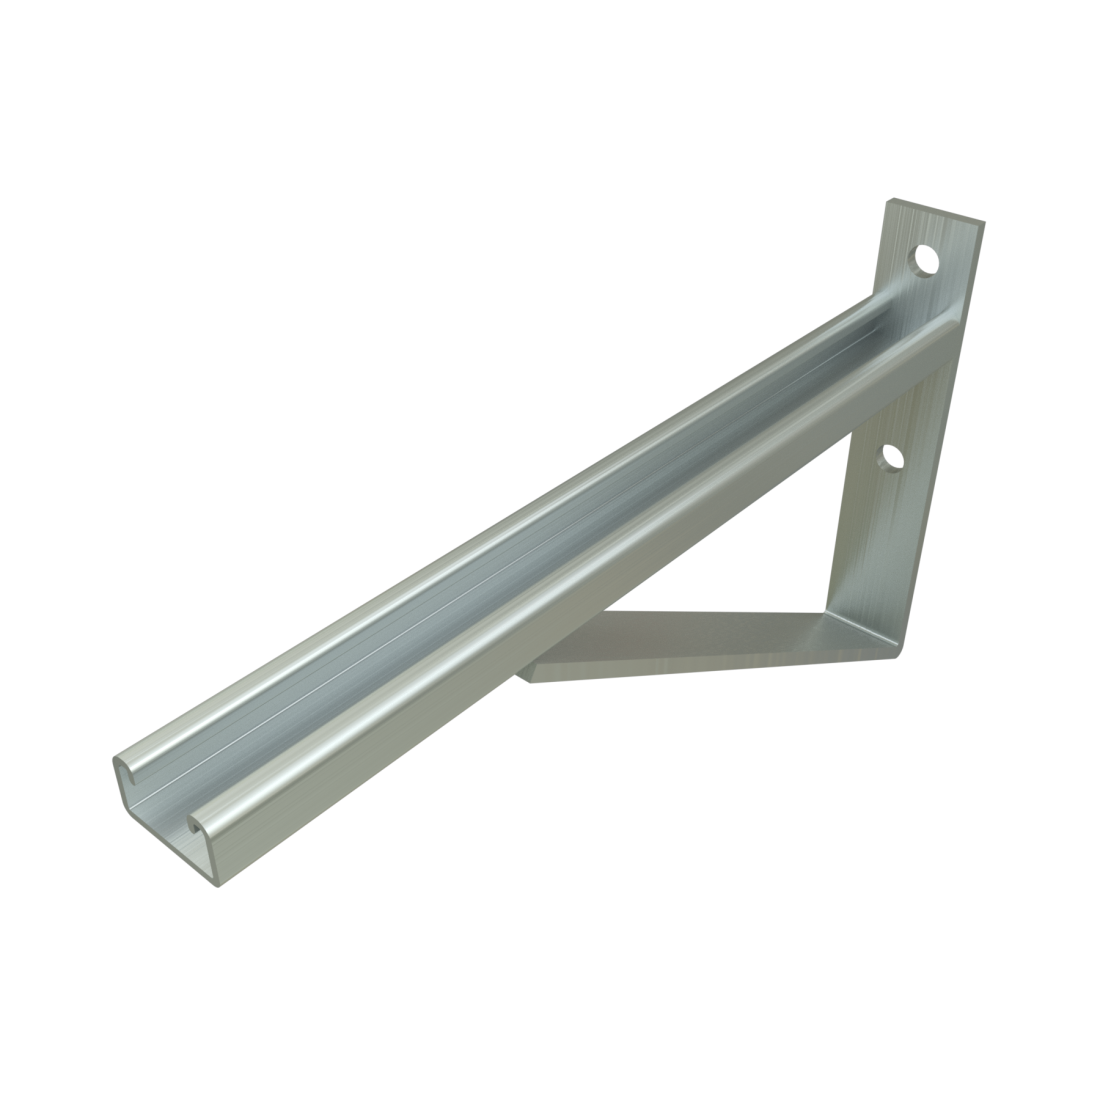 Data Center Triangle Wall Support Bracket for Cable Runway